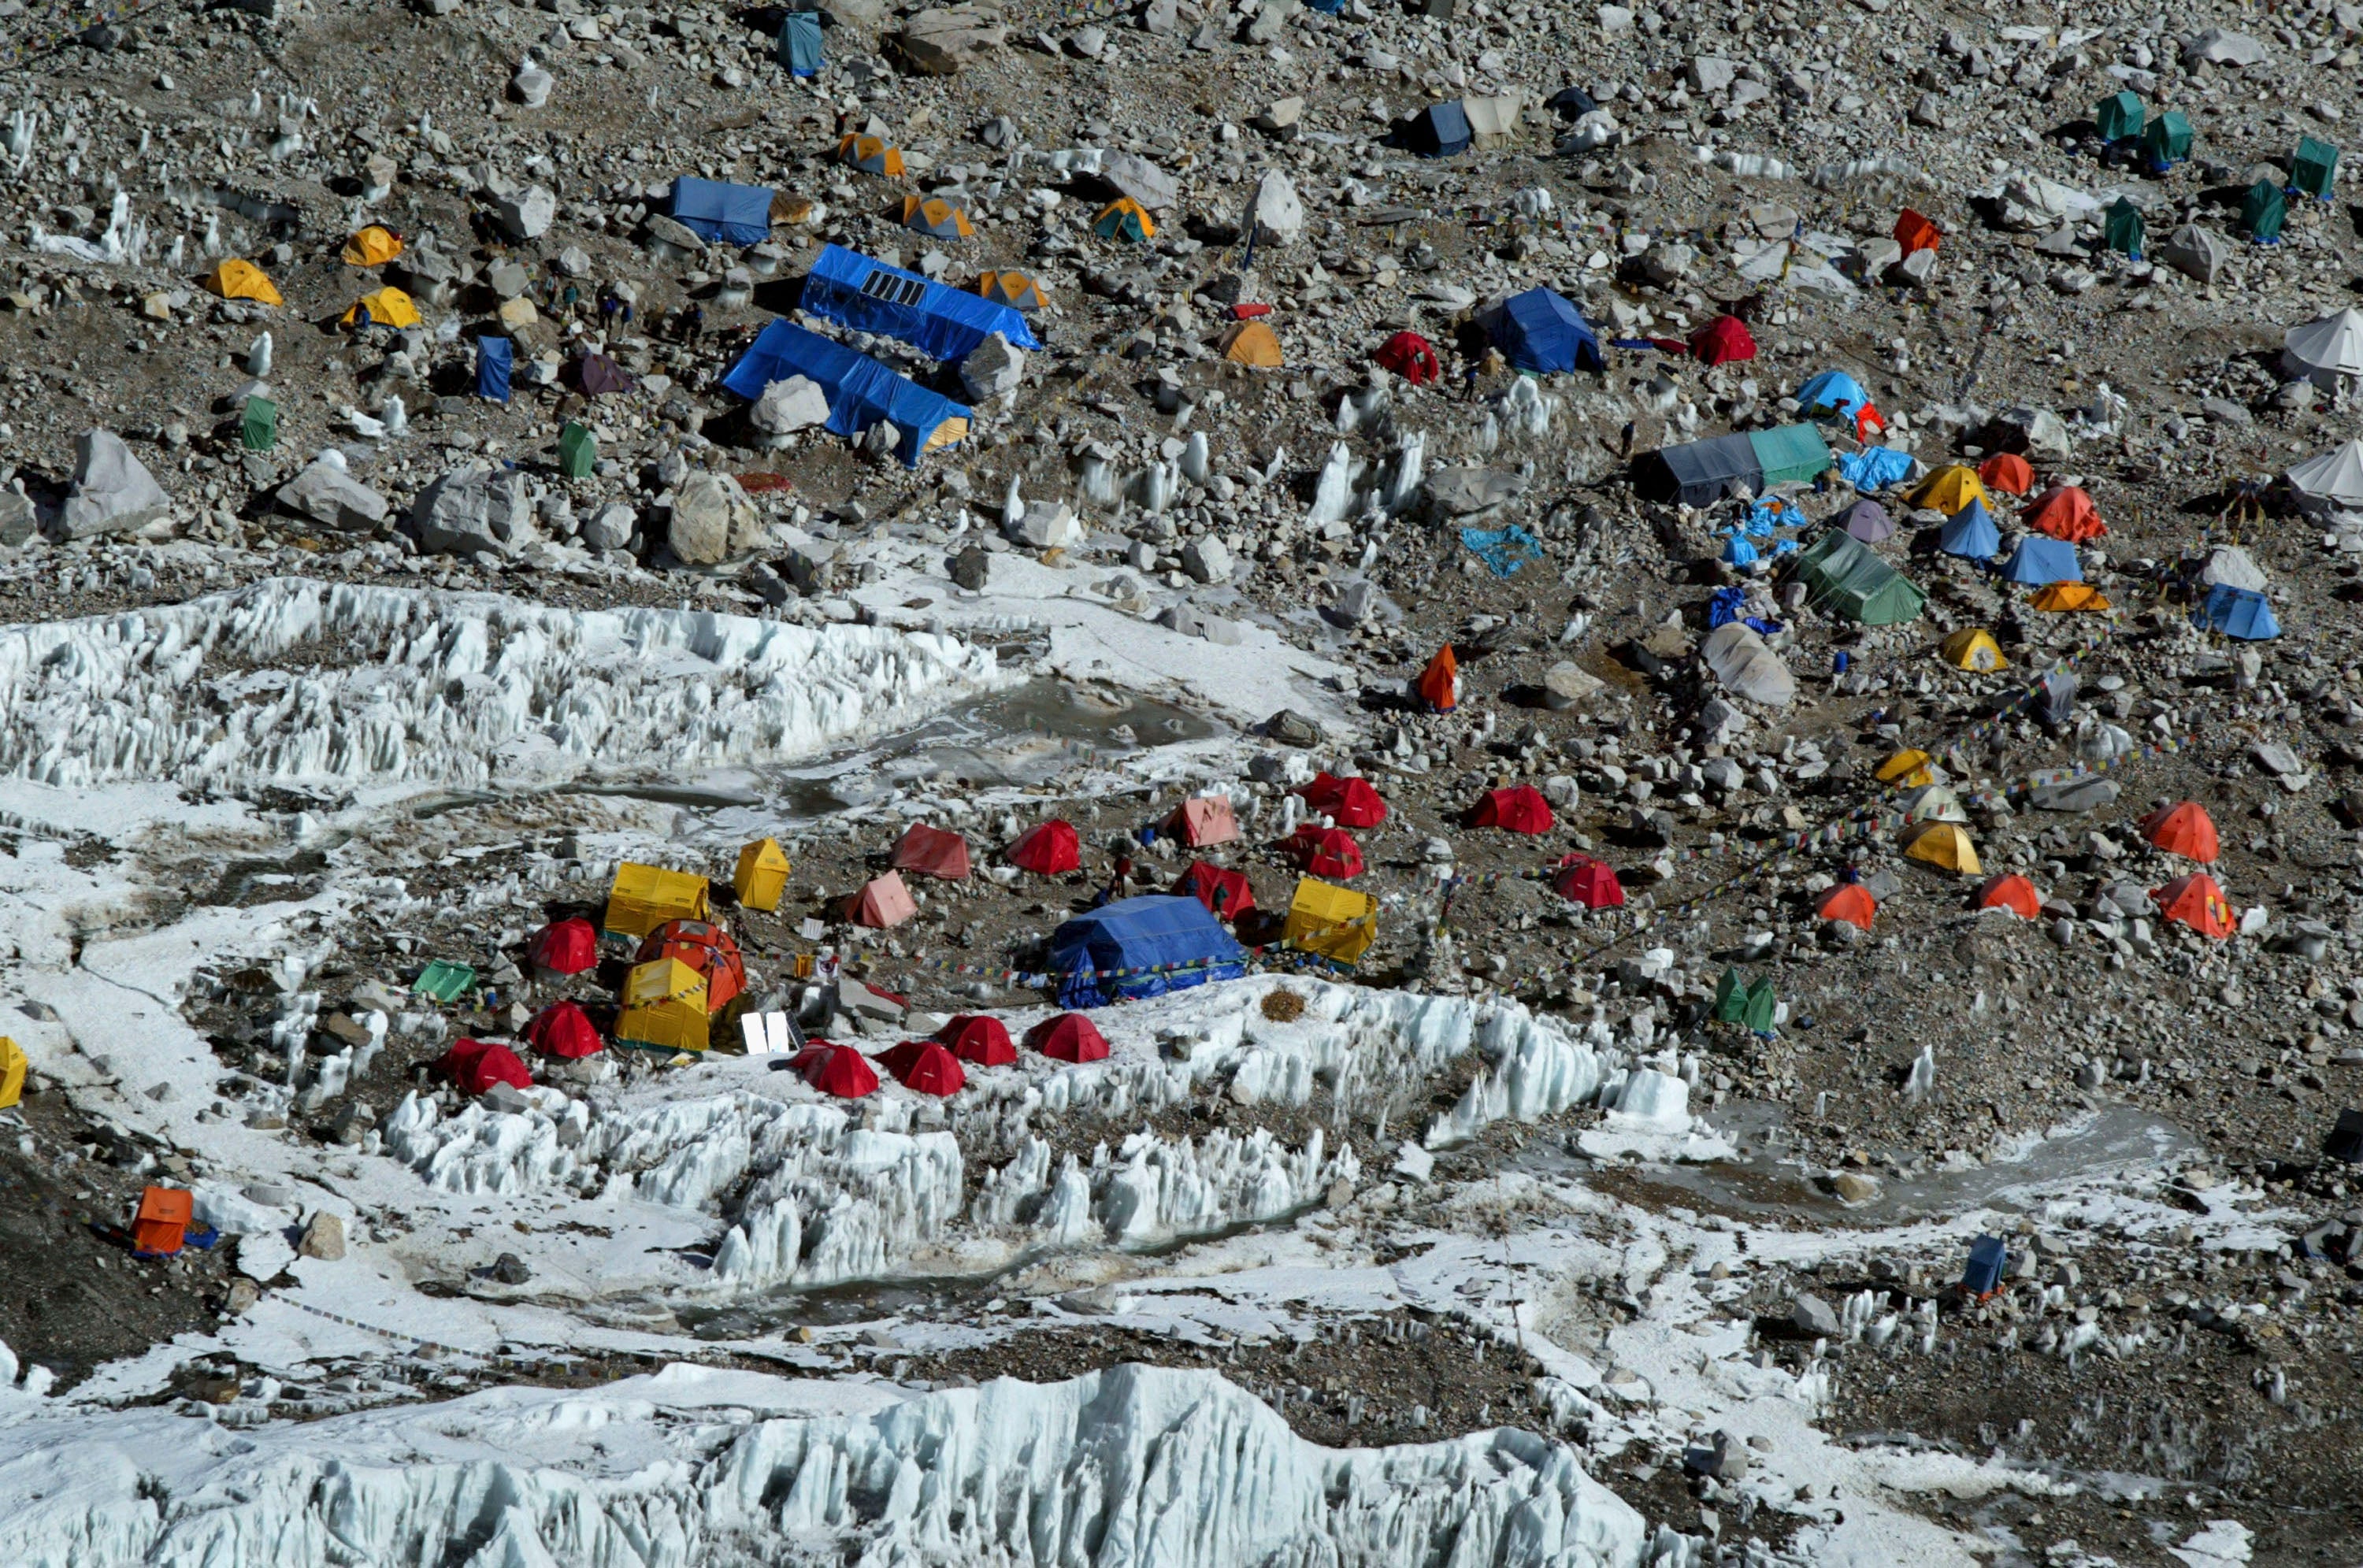 Nepal Will Force Each Everest Climber To Collect 18 Pounds of Trash